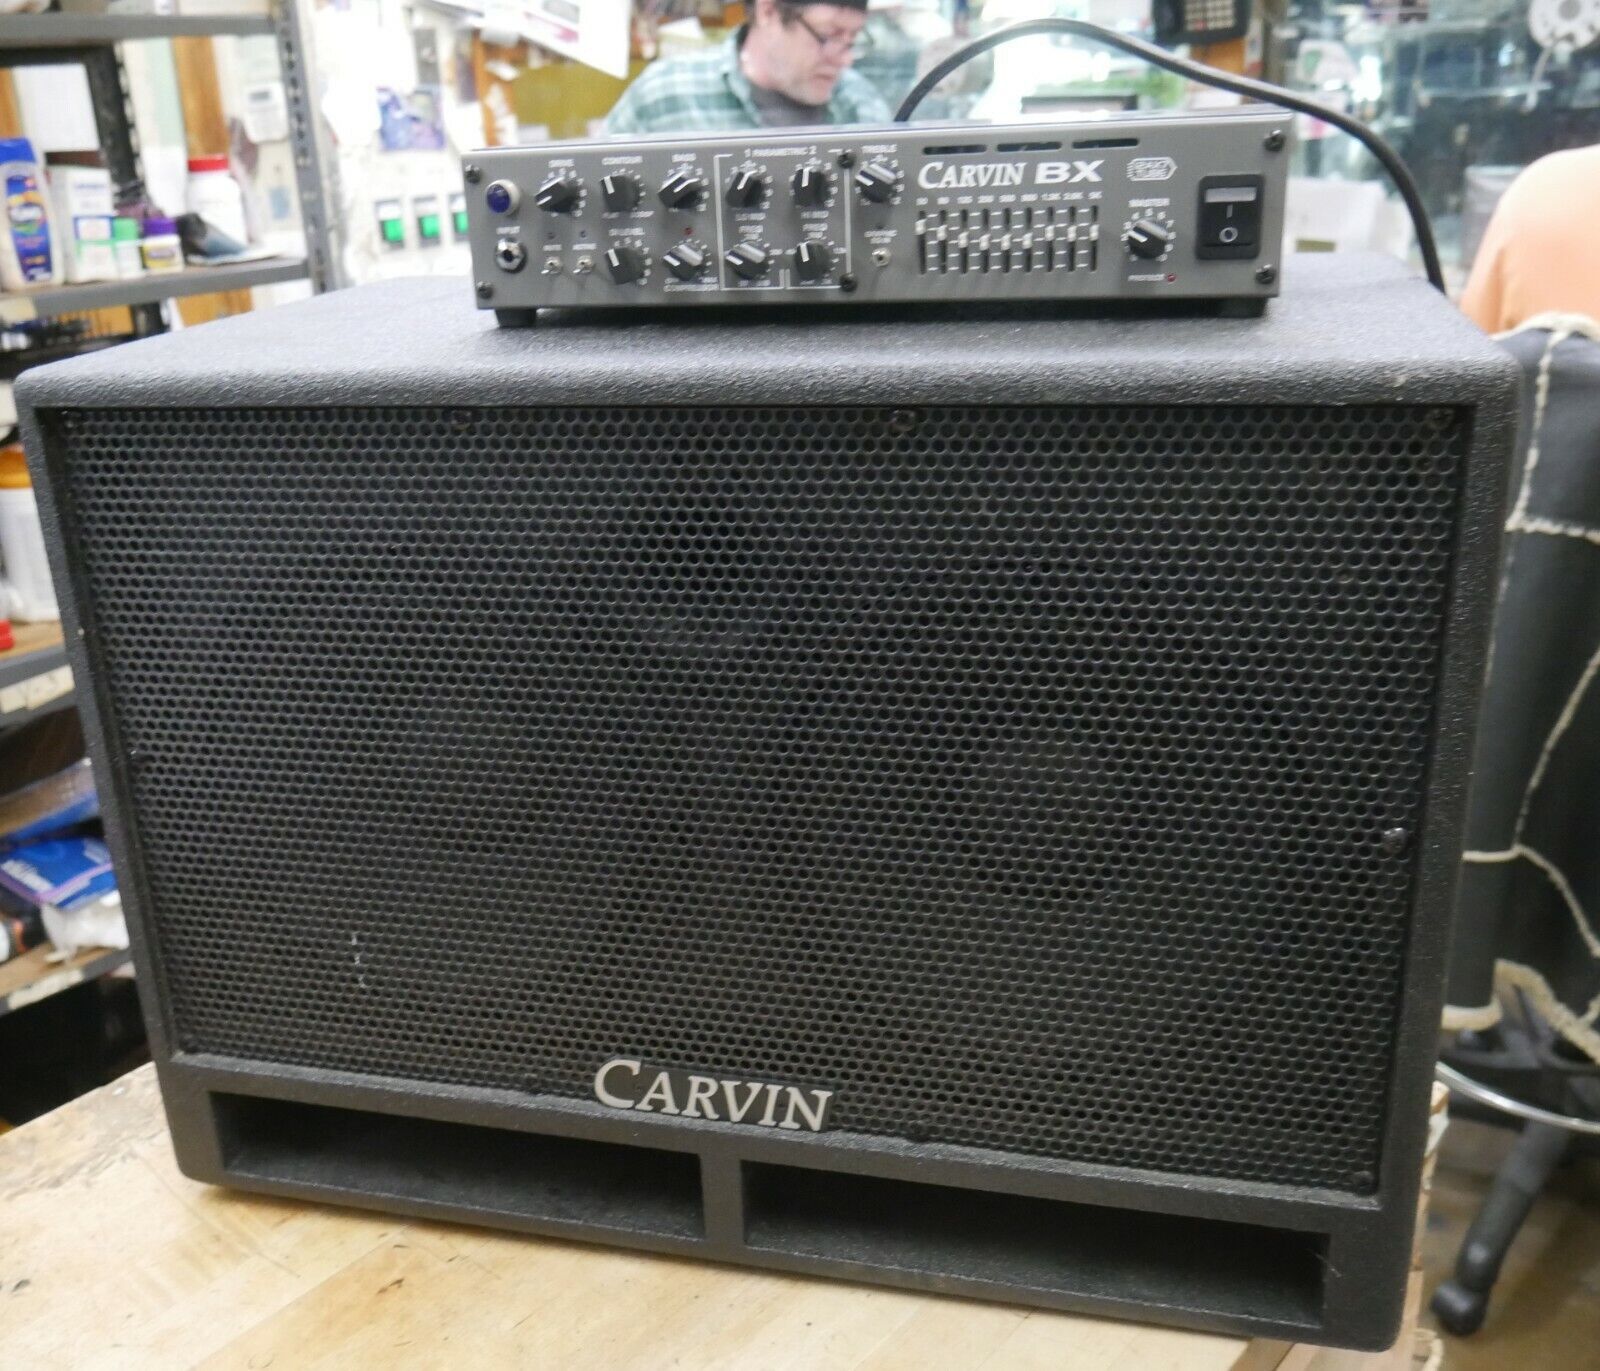 Carvin BX500 Bass Amplifier W GARVIN BRX 10.2 NEO SPEAKER PRE OWNED TESTED